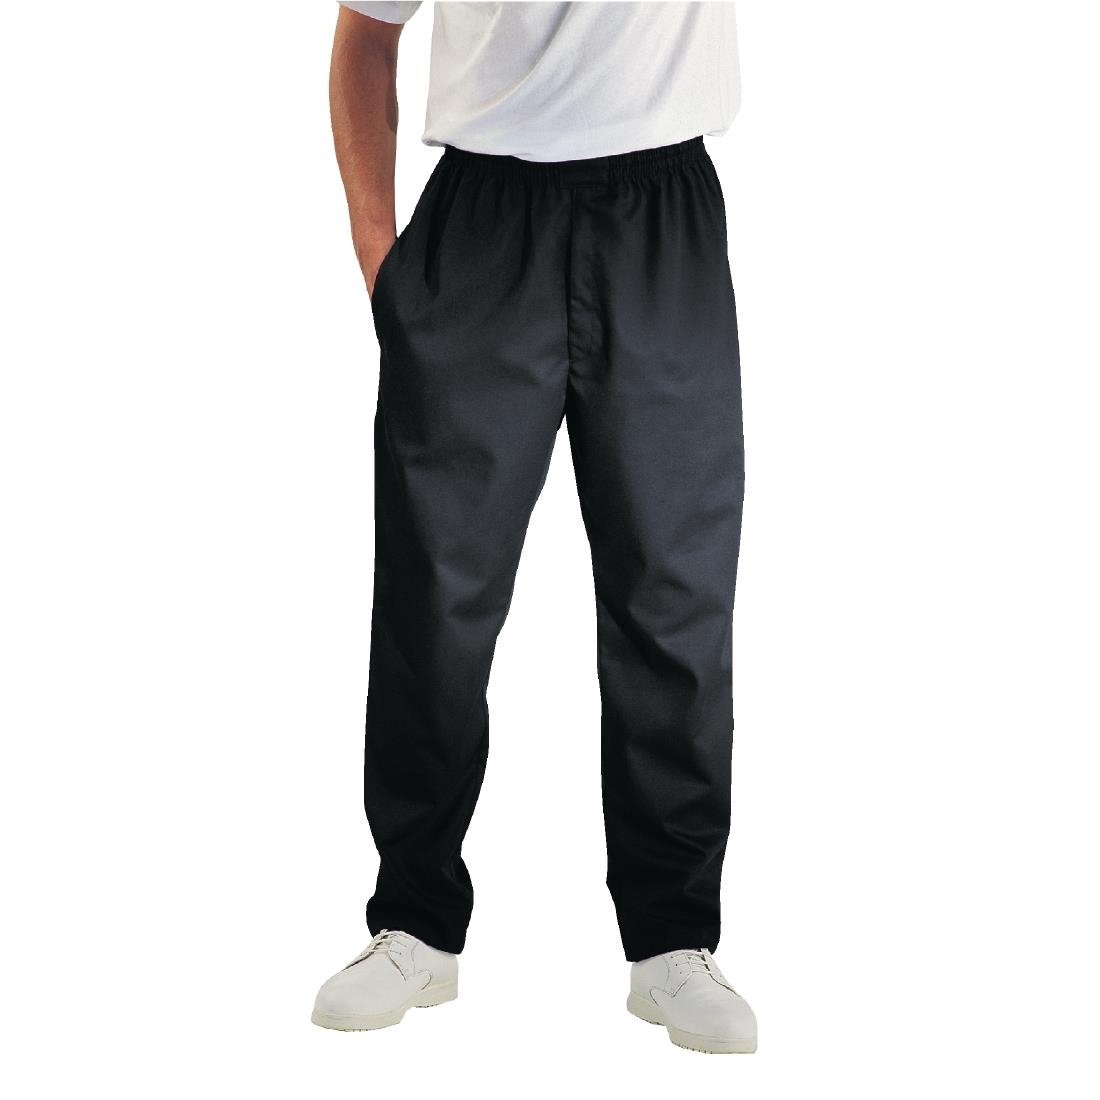 A029-5XL Chef Works Essential Baggy Trousers Black 5XL